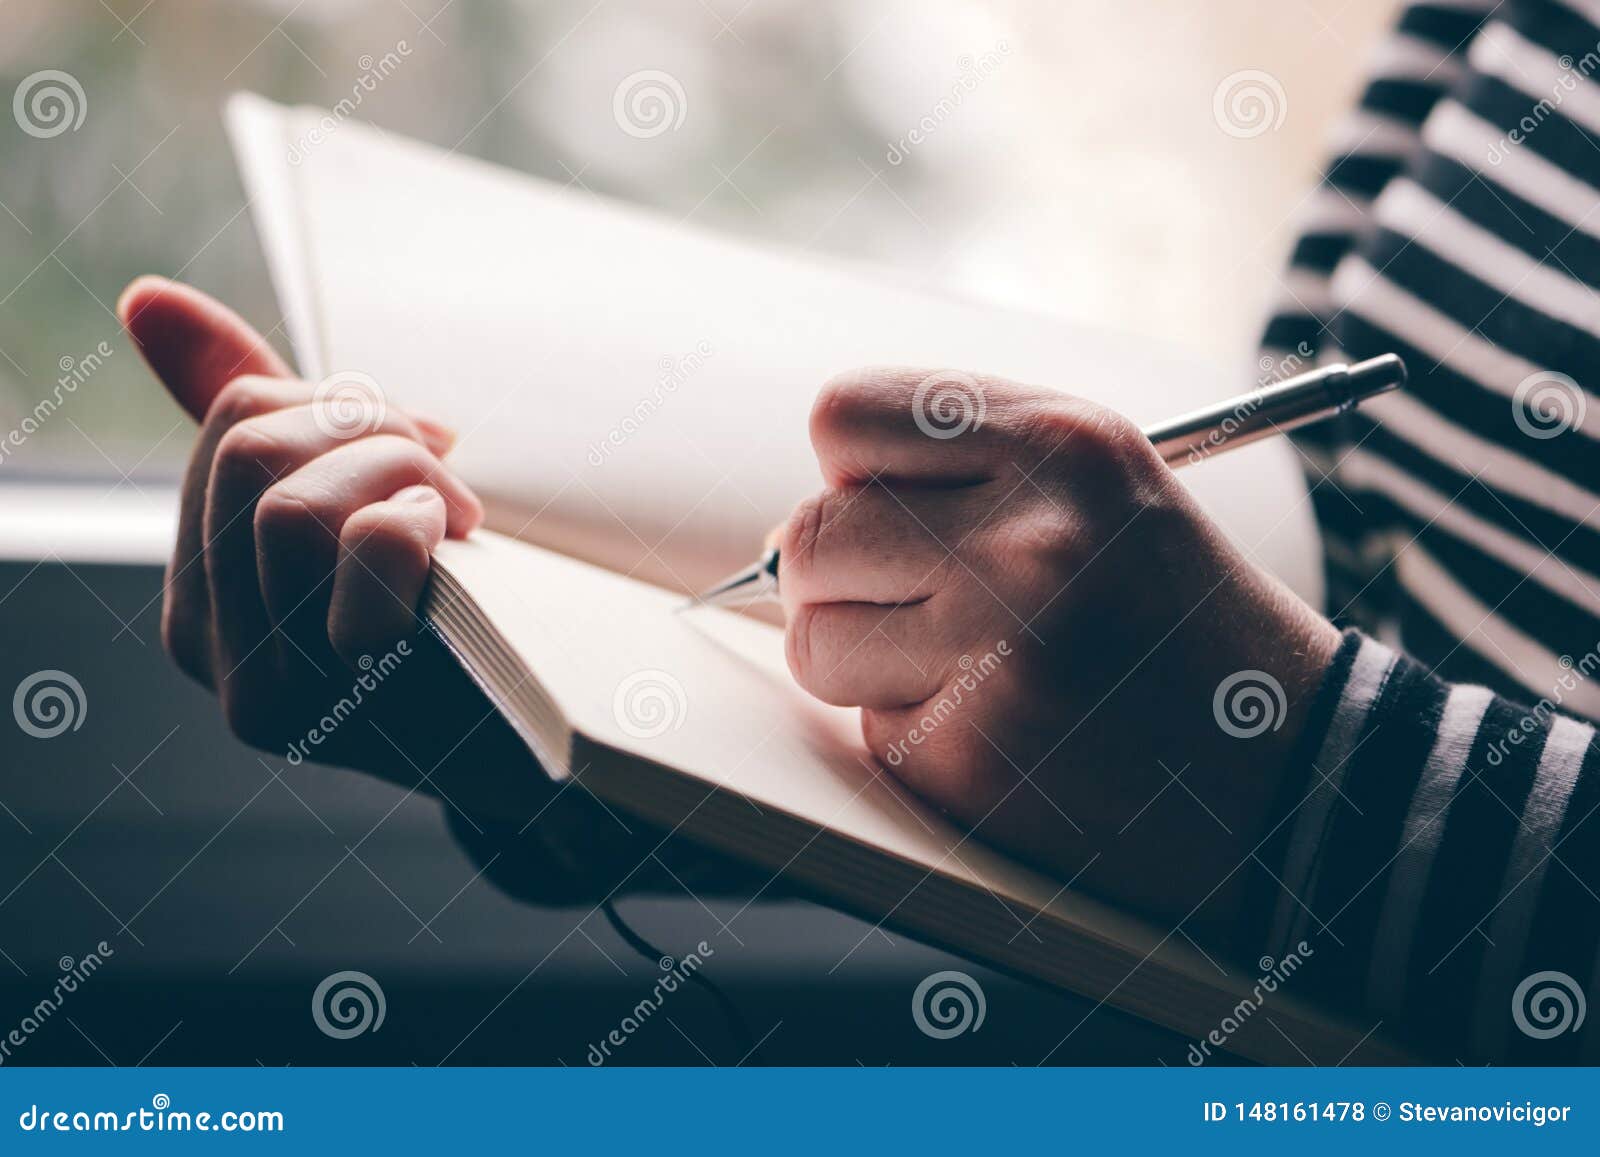 left-handed woman writing diary